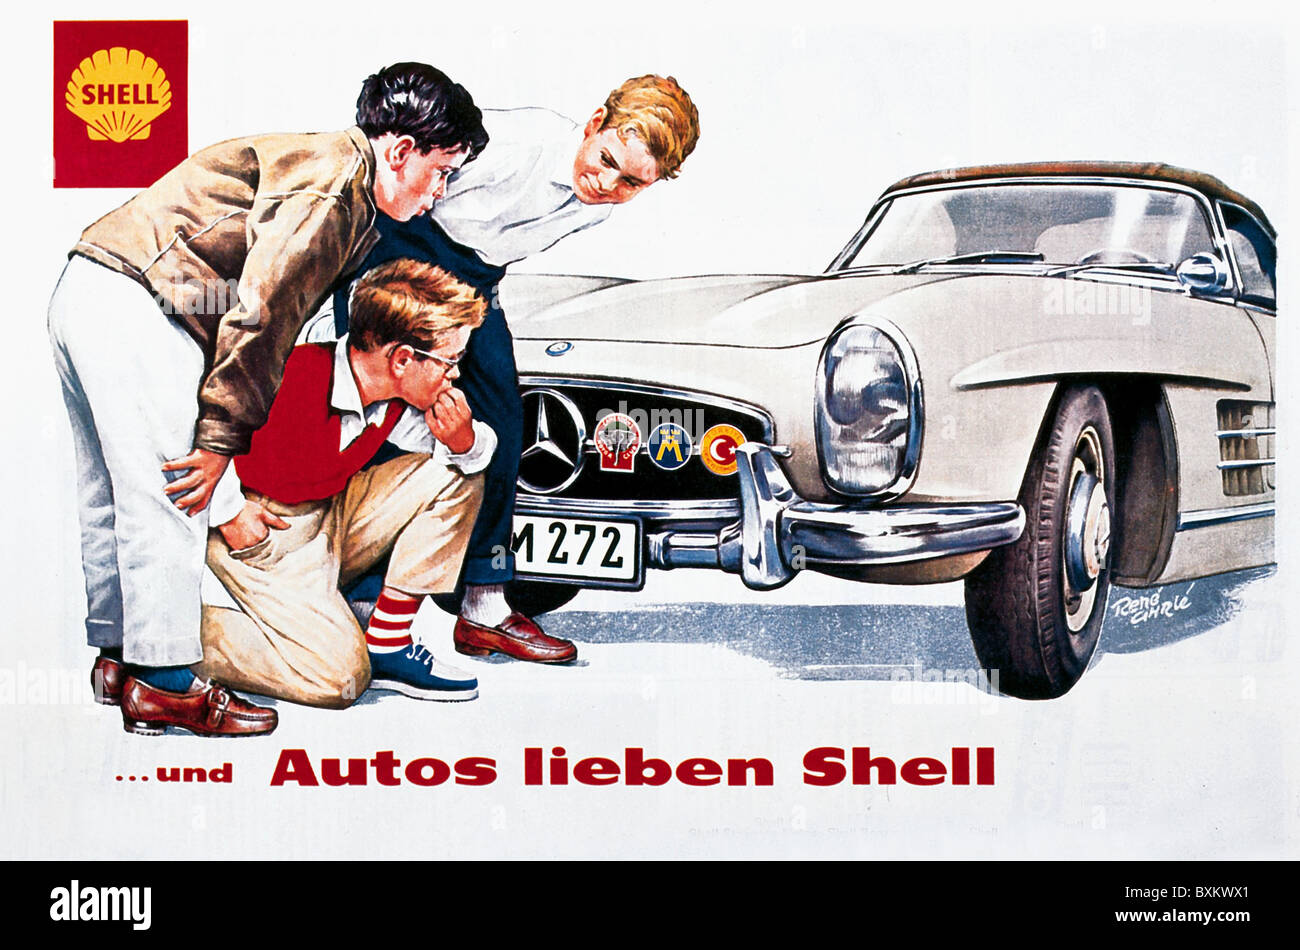 advertising, Shell oil company, boys with car, Germany, circa 1960, Additional-Rights-Clearences-Not Available Stock Photo